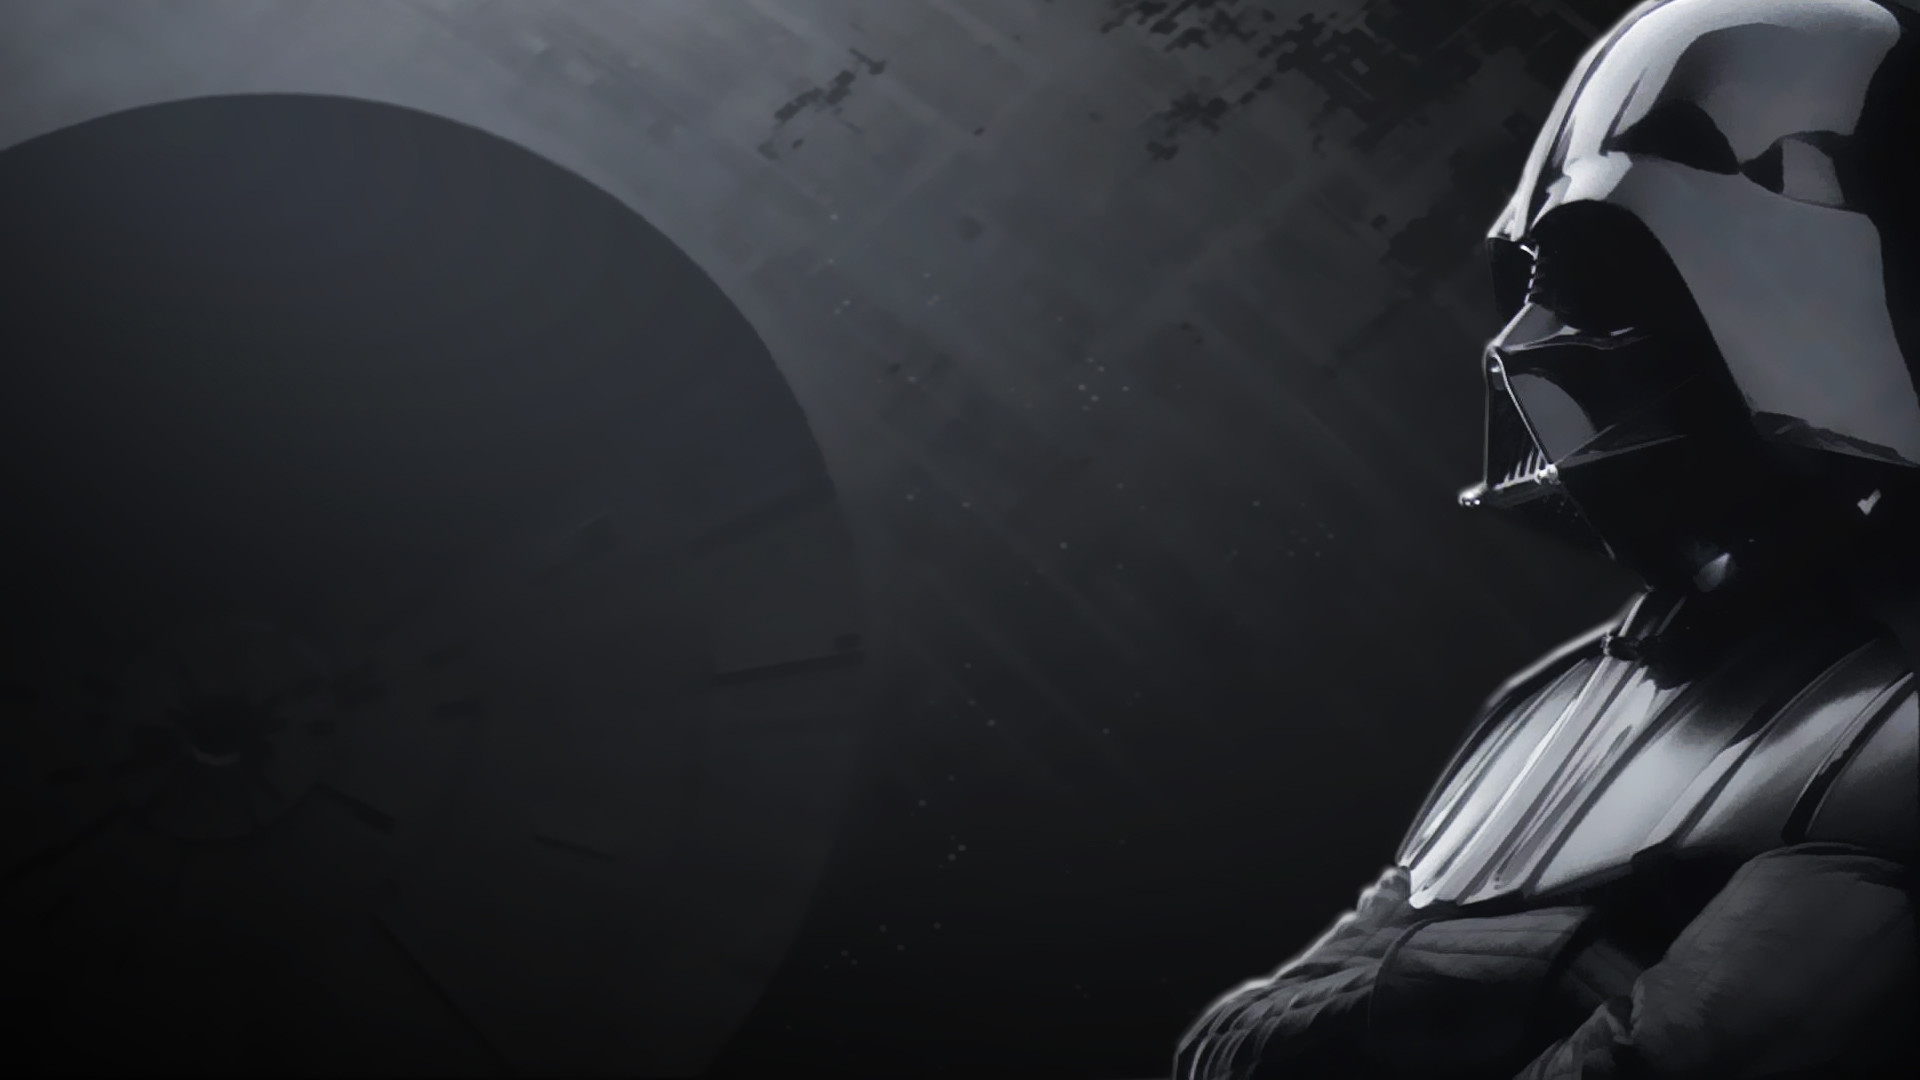 Some Darth Vader wallpapers